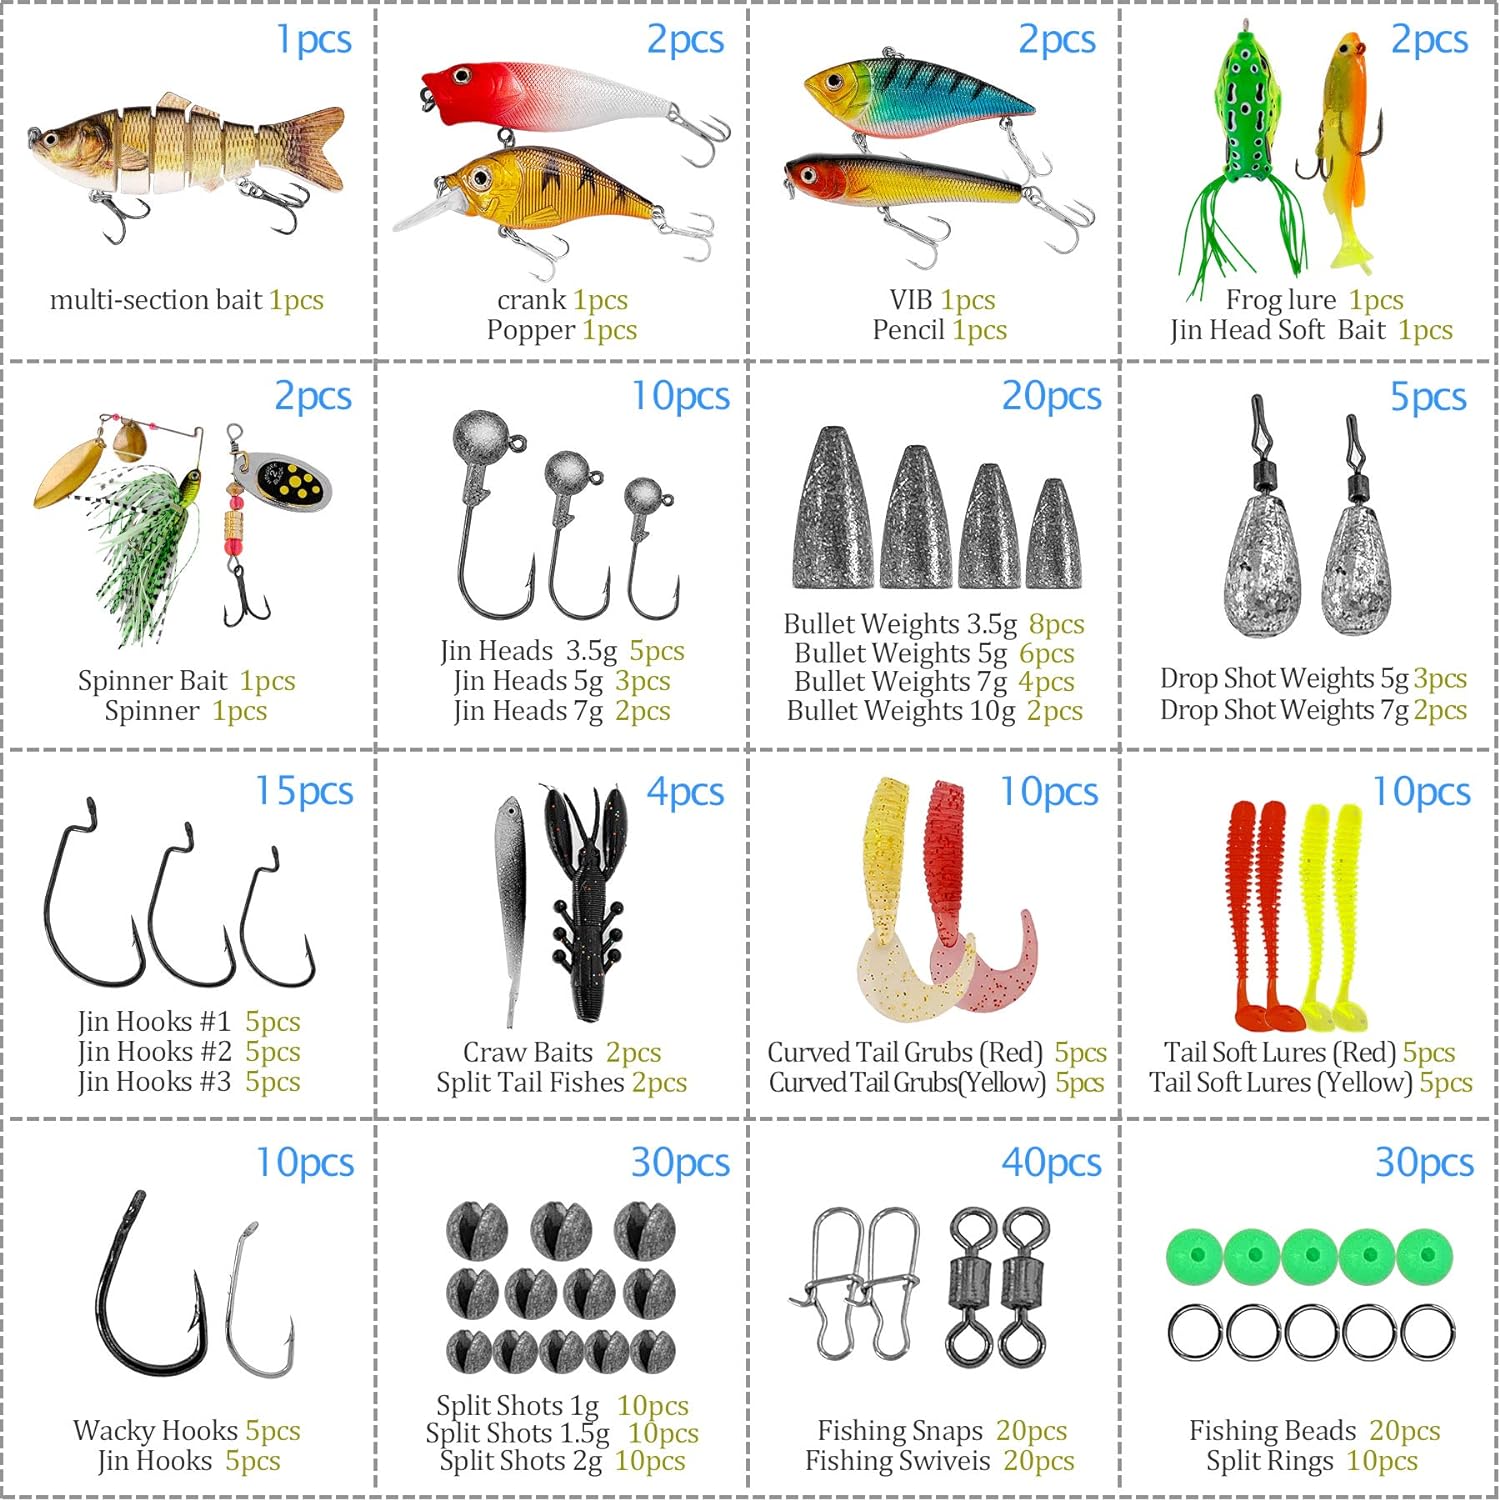 Fishing Lures Baits Tackle Fishing Accessories Kit Including Crankbaits, Spinnerbaits,Jig Hooks, Plastic Worms, Topwater Lures, Tackle Box and Fishing Gear Lures Kit Set - Fishing Lures Baits Tackle Kit Set Review